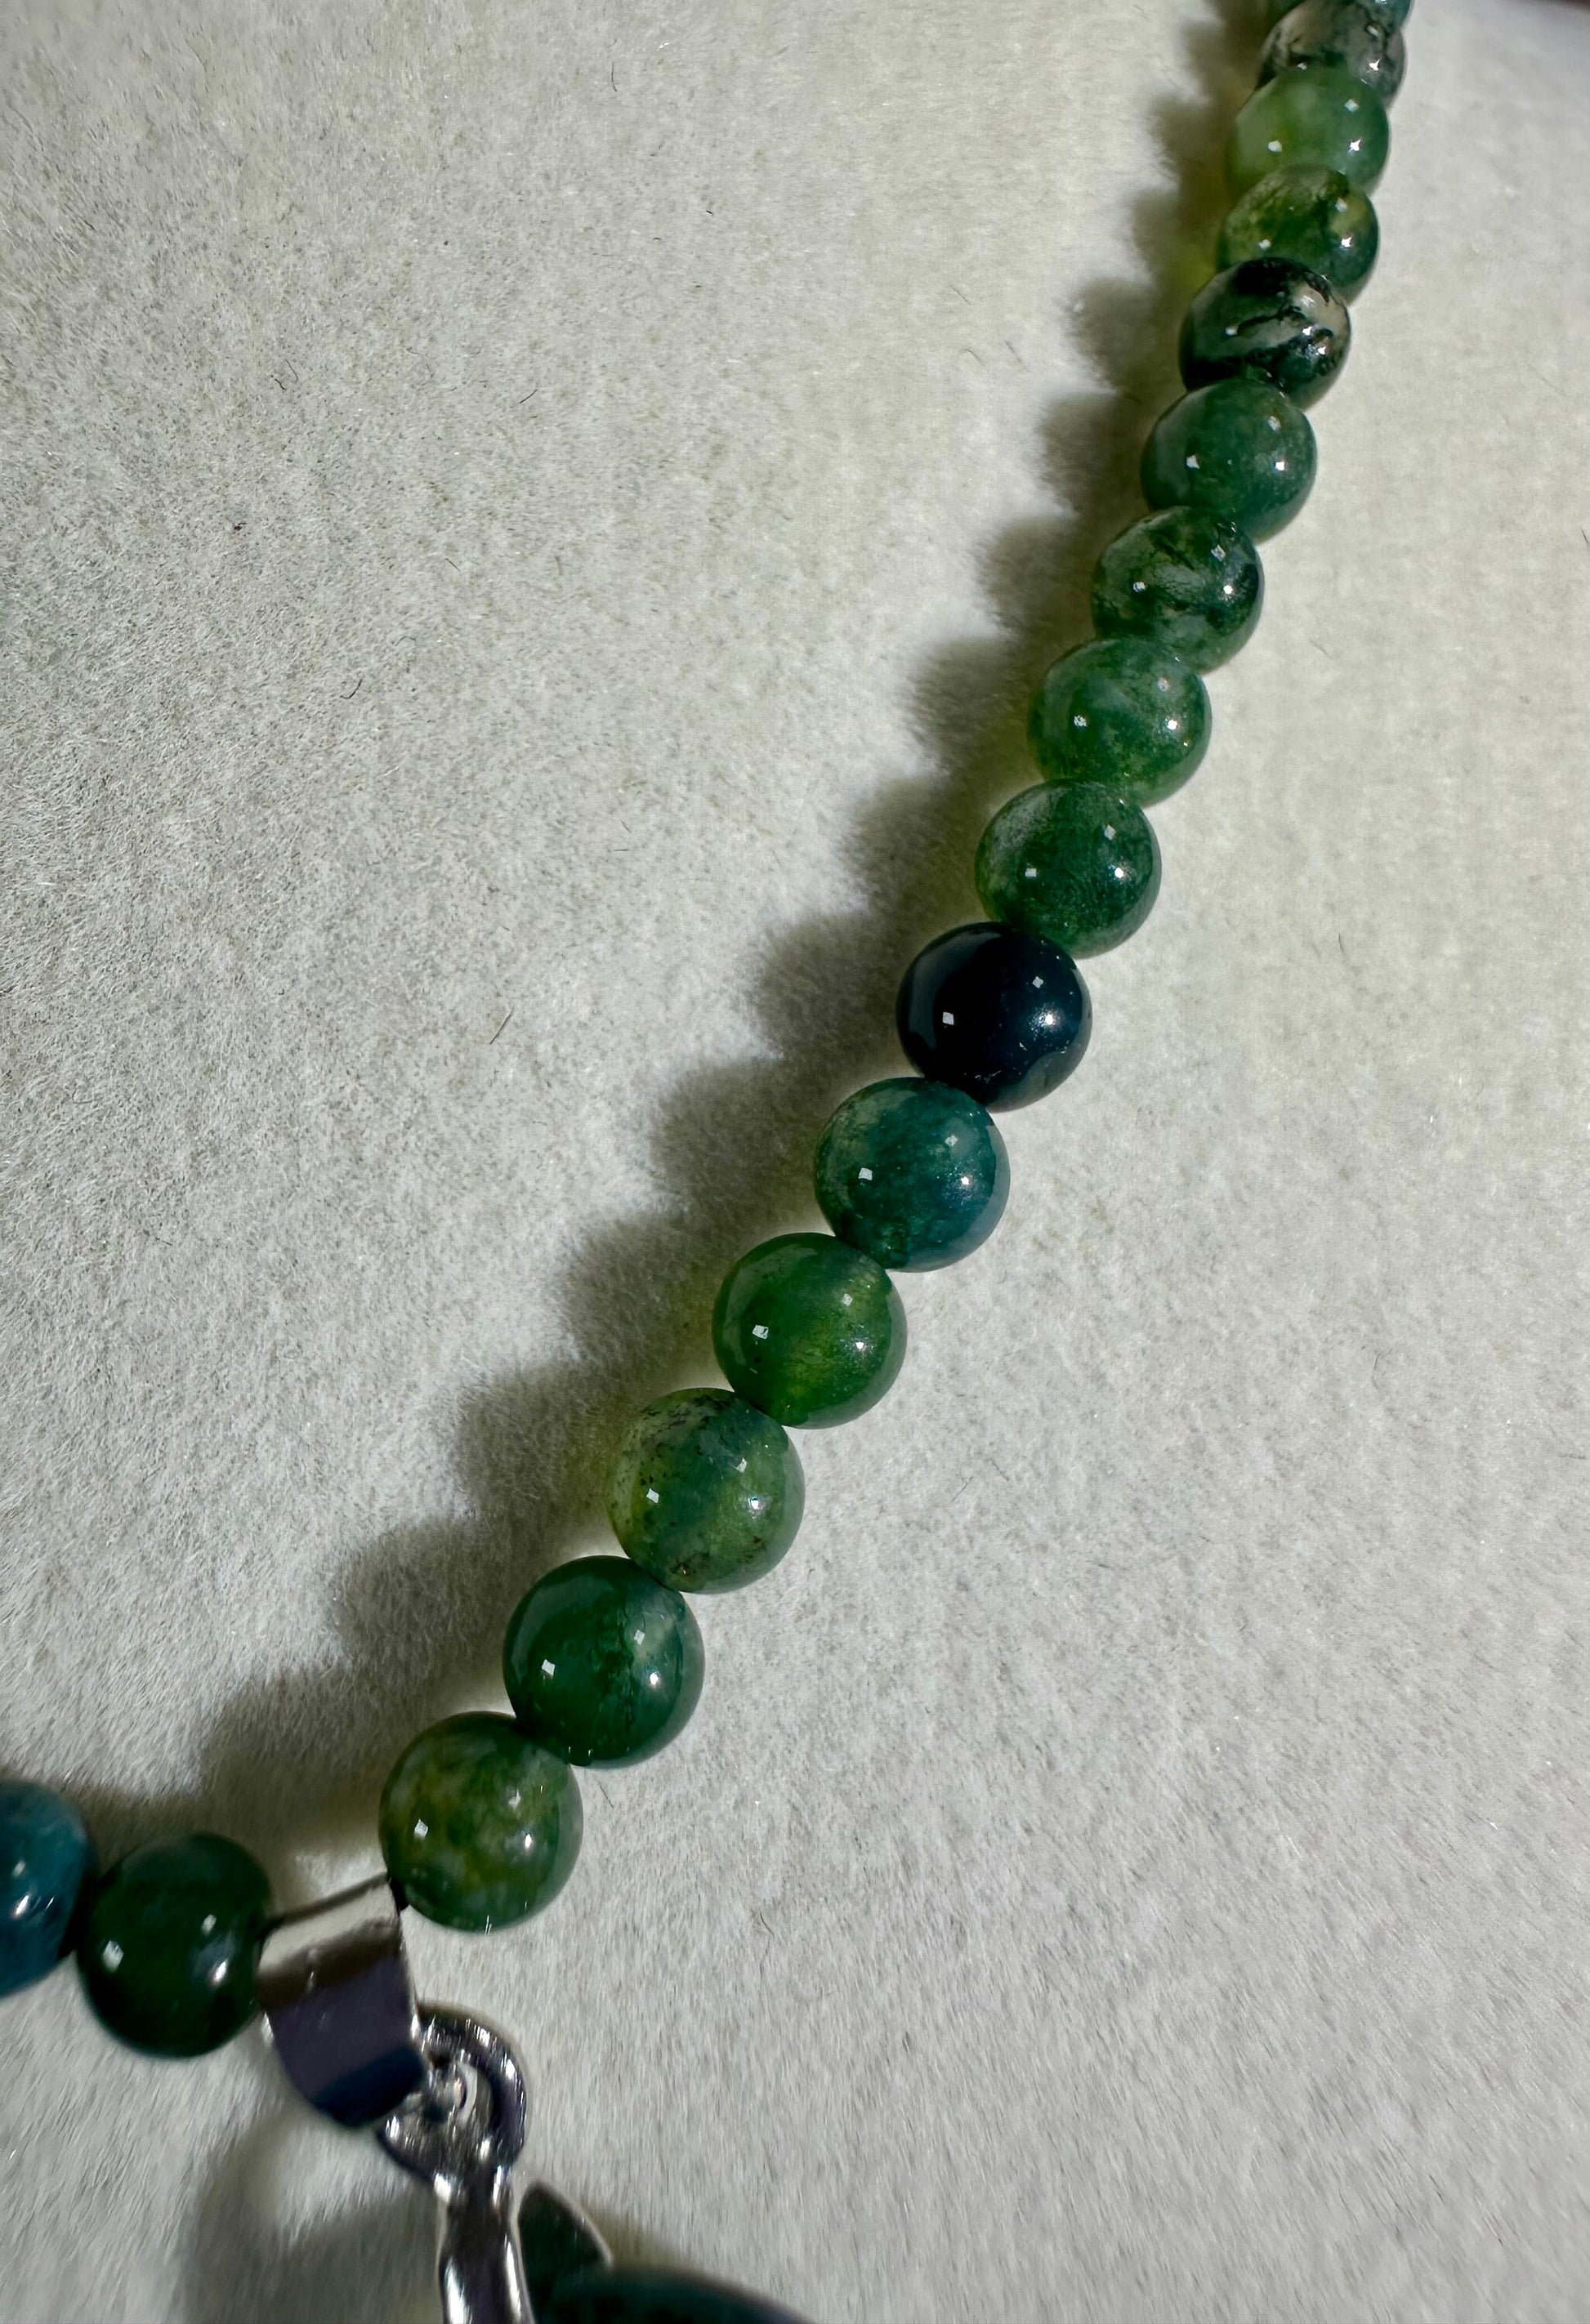 Moss Agate Pendant. Custom Made Moss Agate Beaded Necklace. Beautiful Moss Crystal Necklace